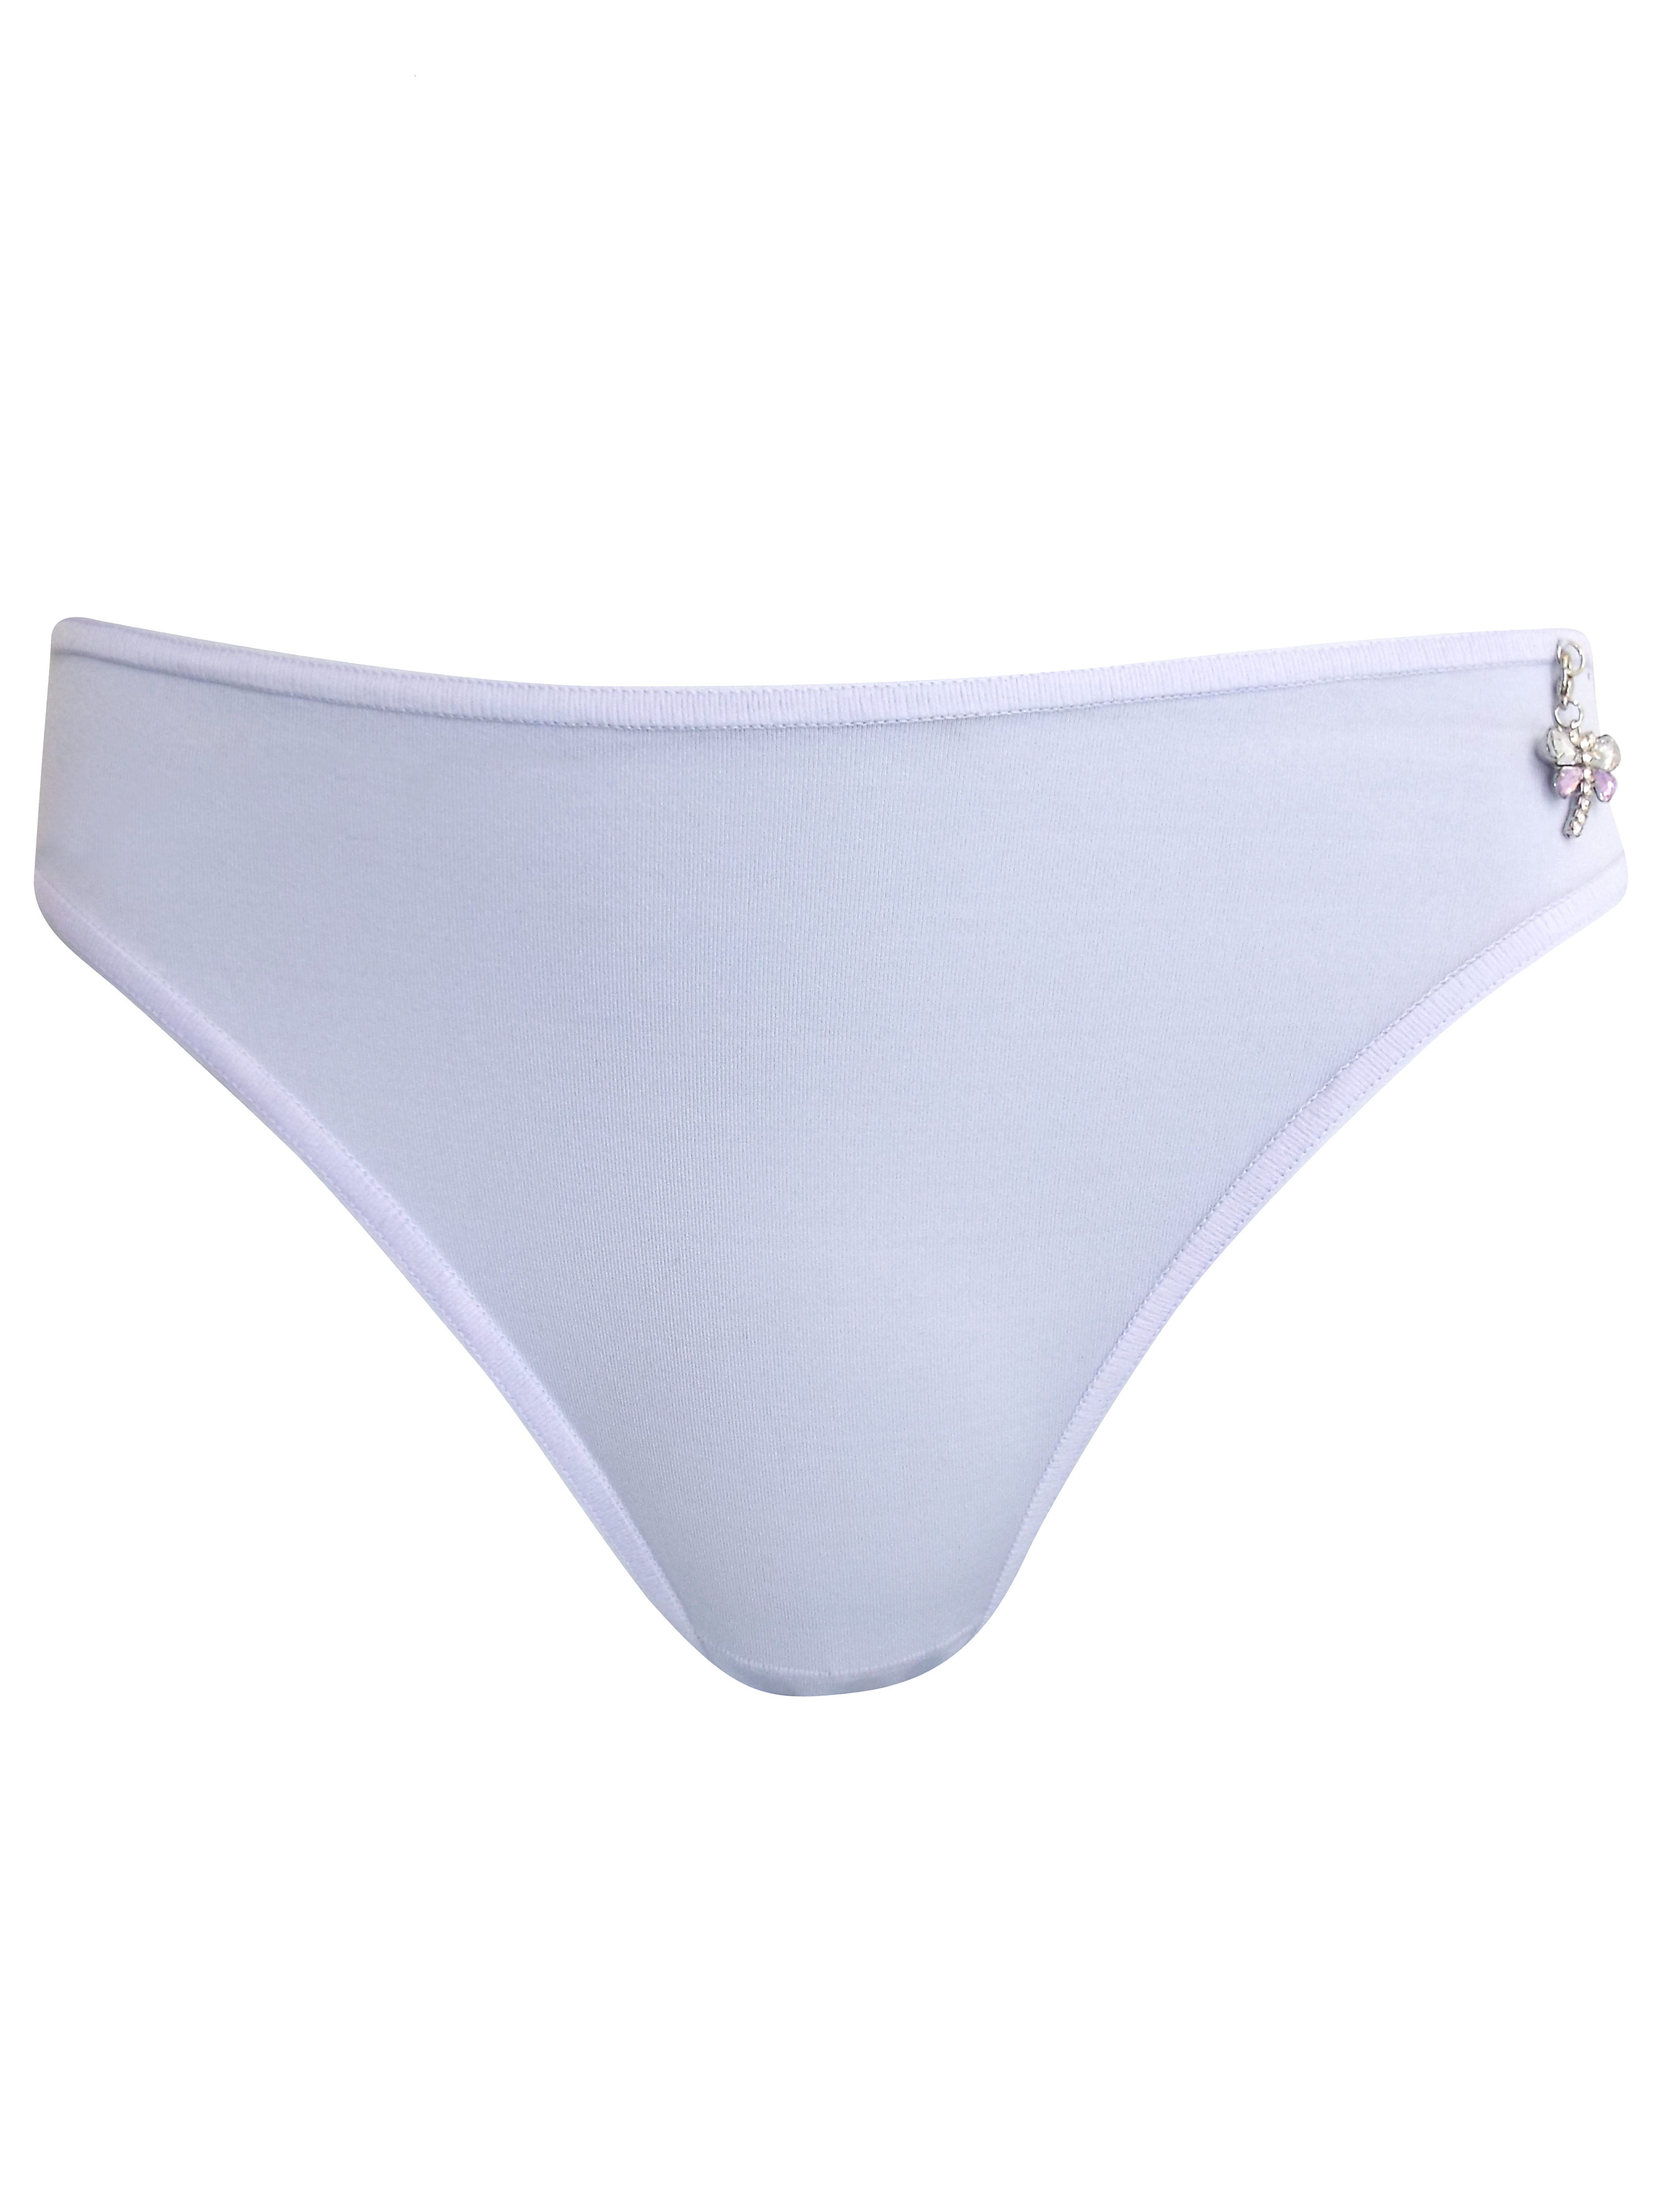 Nina Von C - - NinaVonC LILAC Low Rise Thong with Dragonfly Charm ...